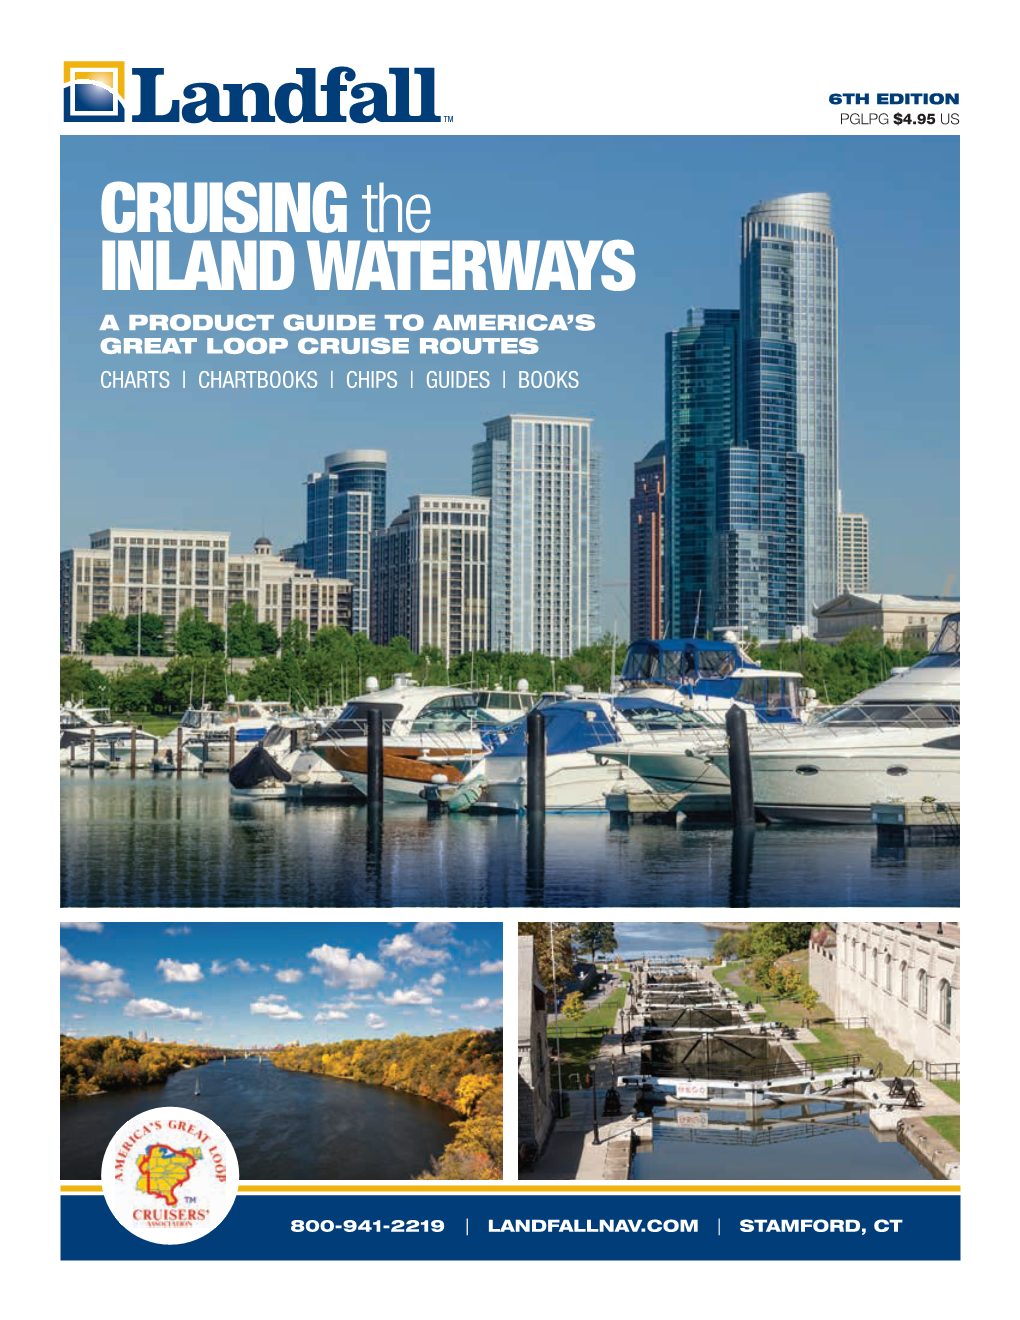 CRUISING the INLAND WATERWAYS a PRODUCT GUIDE to AMERICA’S GREAT LOOP CRUISE ROUTES CHARTS | CHARTBOOKS | CHIPS | GUIDES | BOOKS